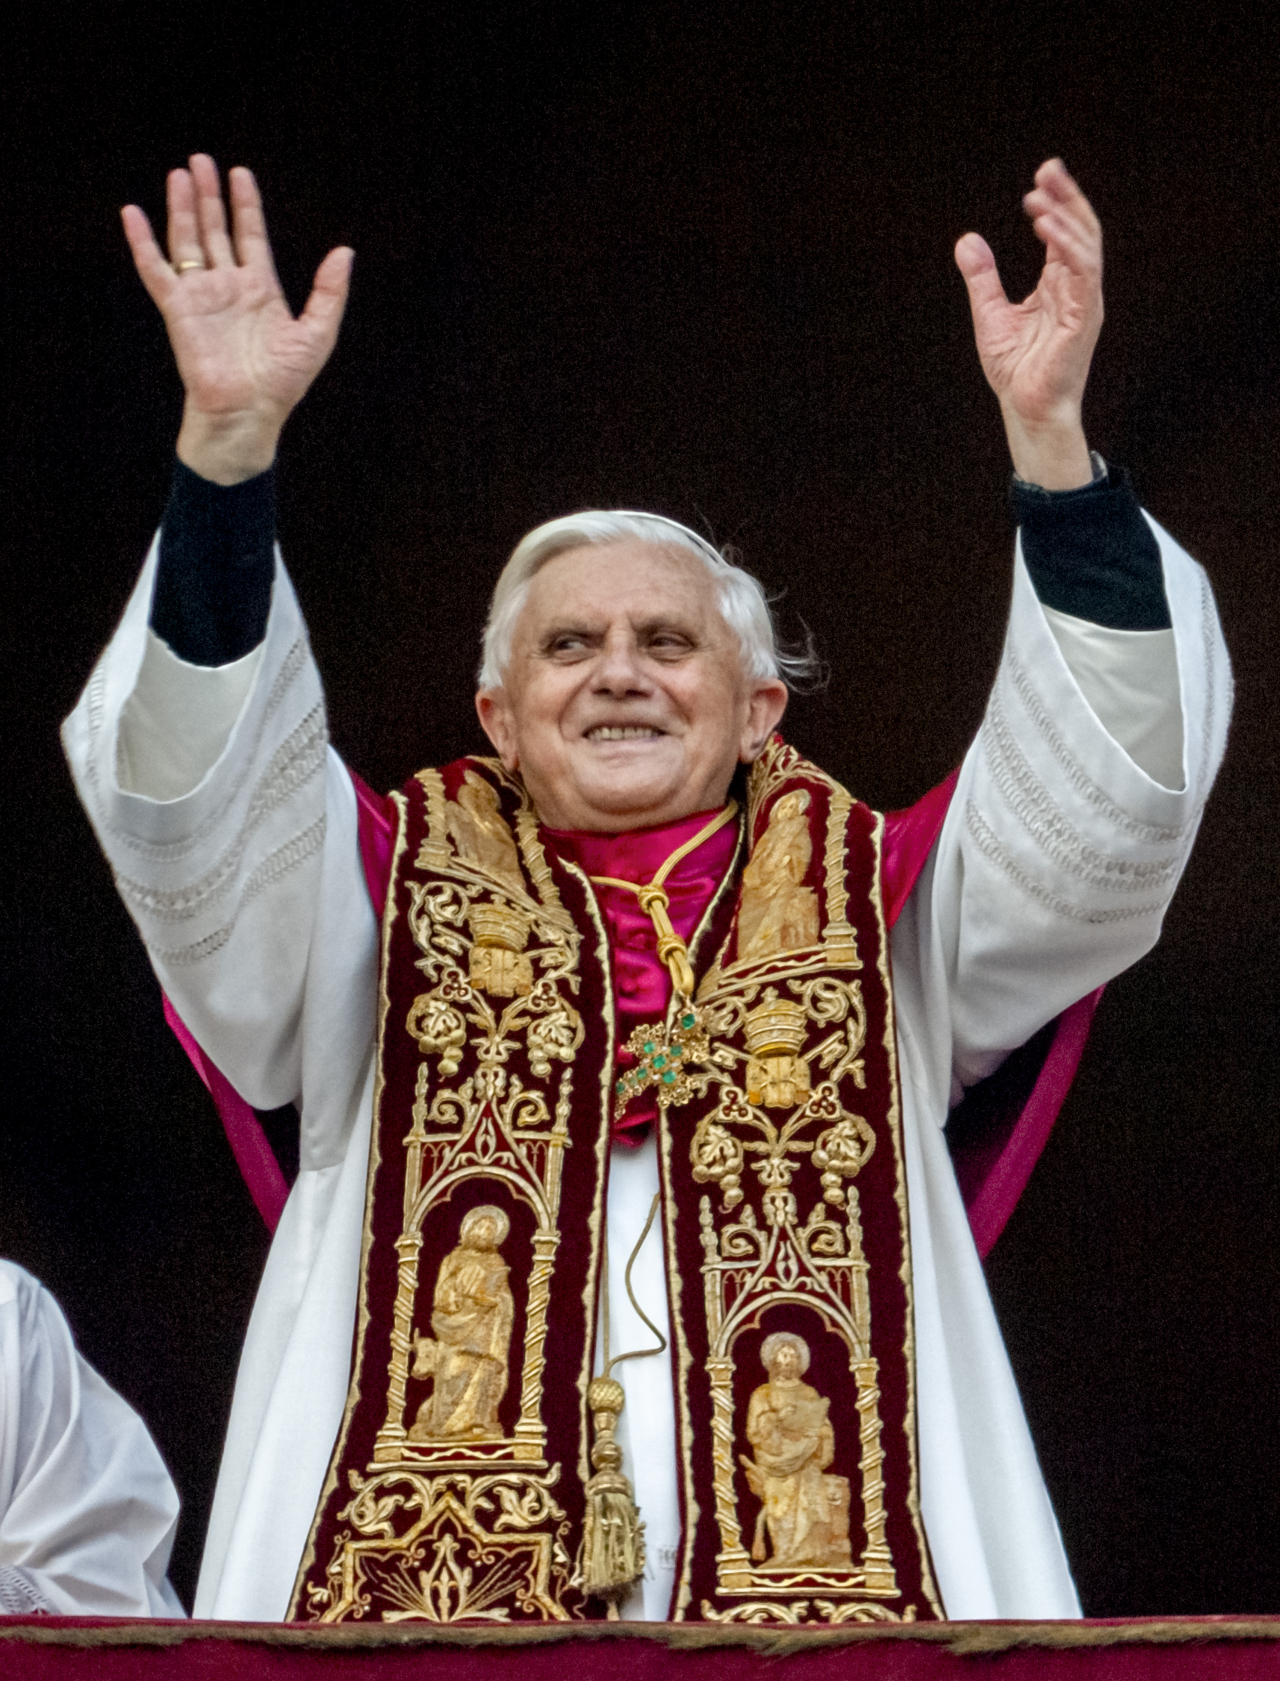 Pope Benedict XVI greets the crowd from the central balcony of St. Peter's Basilica at the Vatican on April 19, 2005, soon after his election. (AP-Yonhap)